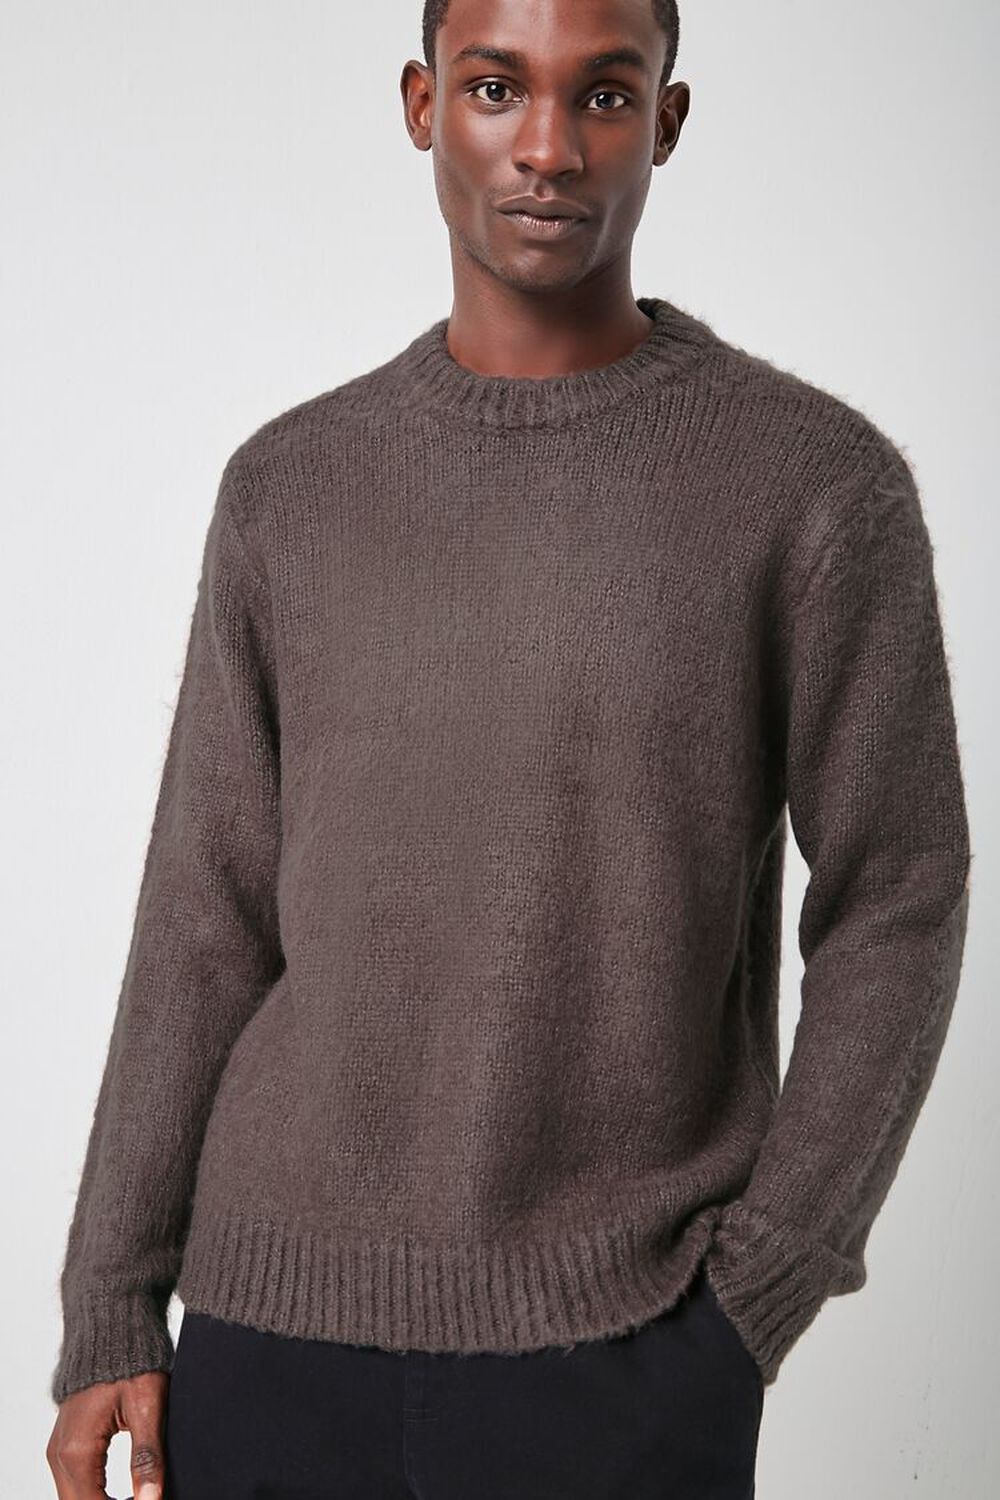 TAUPE Brushed Purl Knit Sweater, image 1